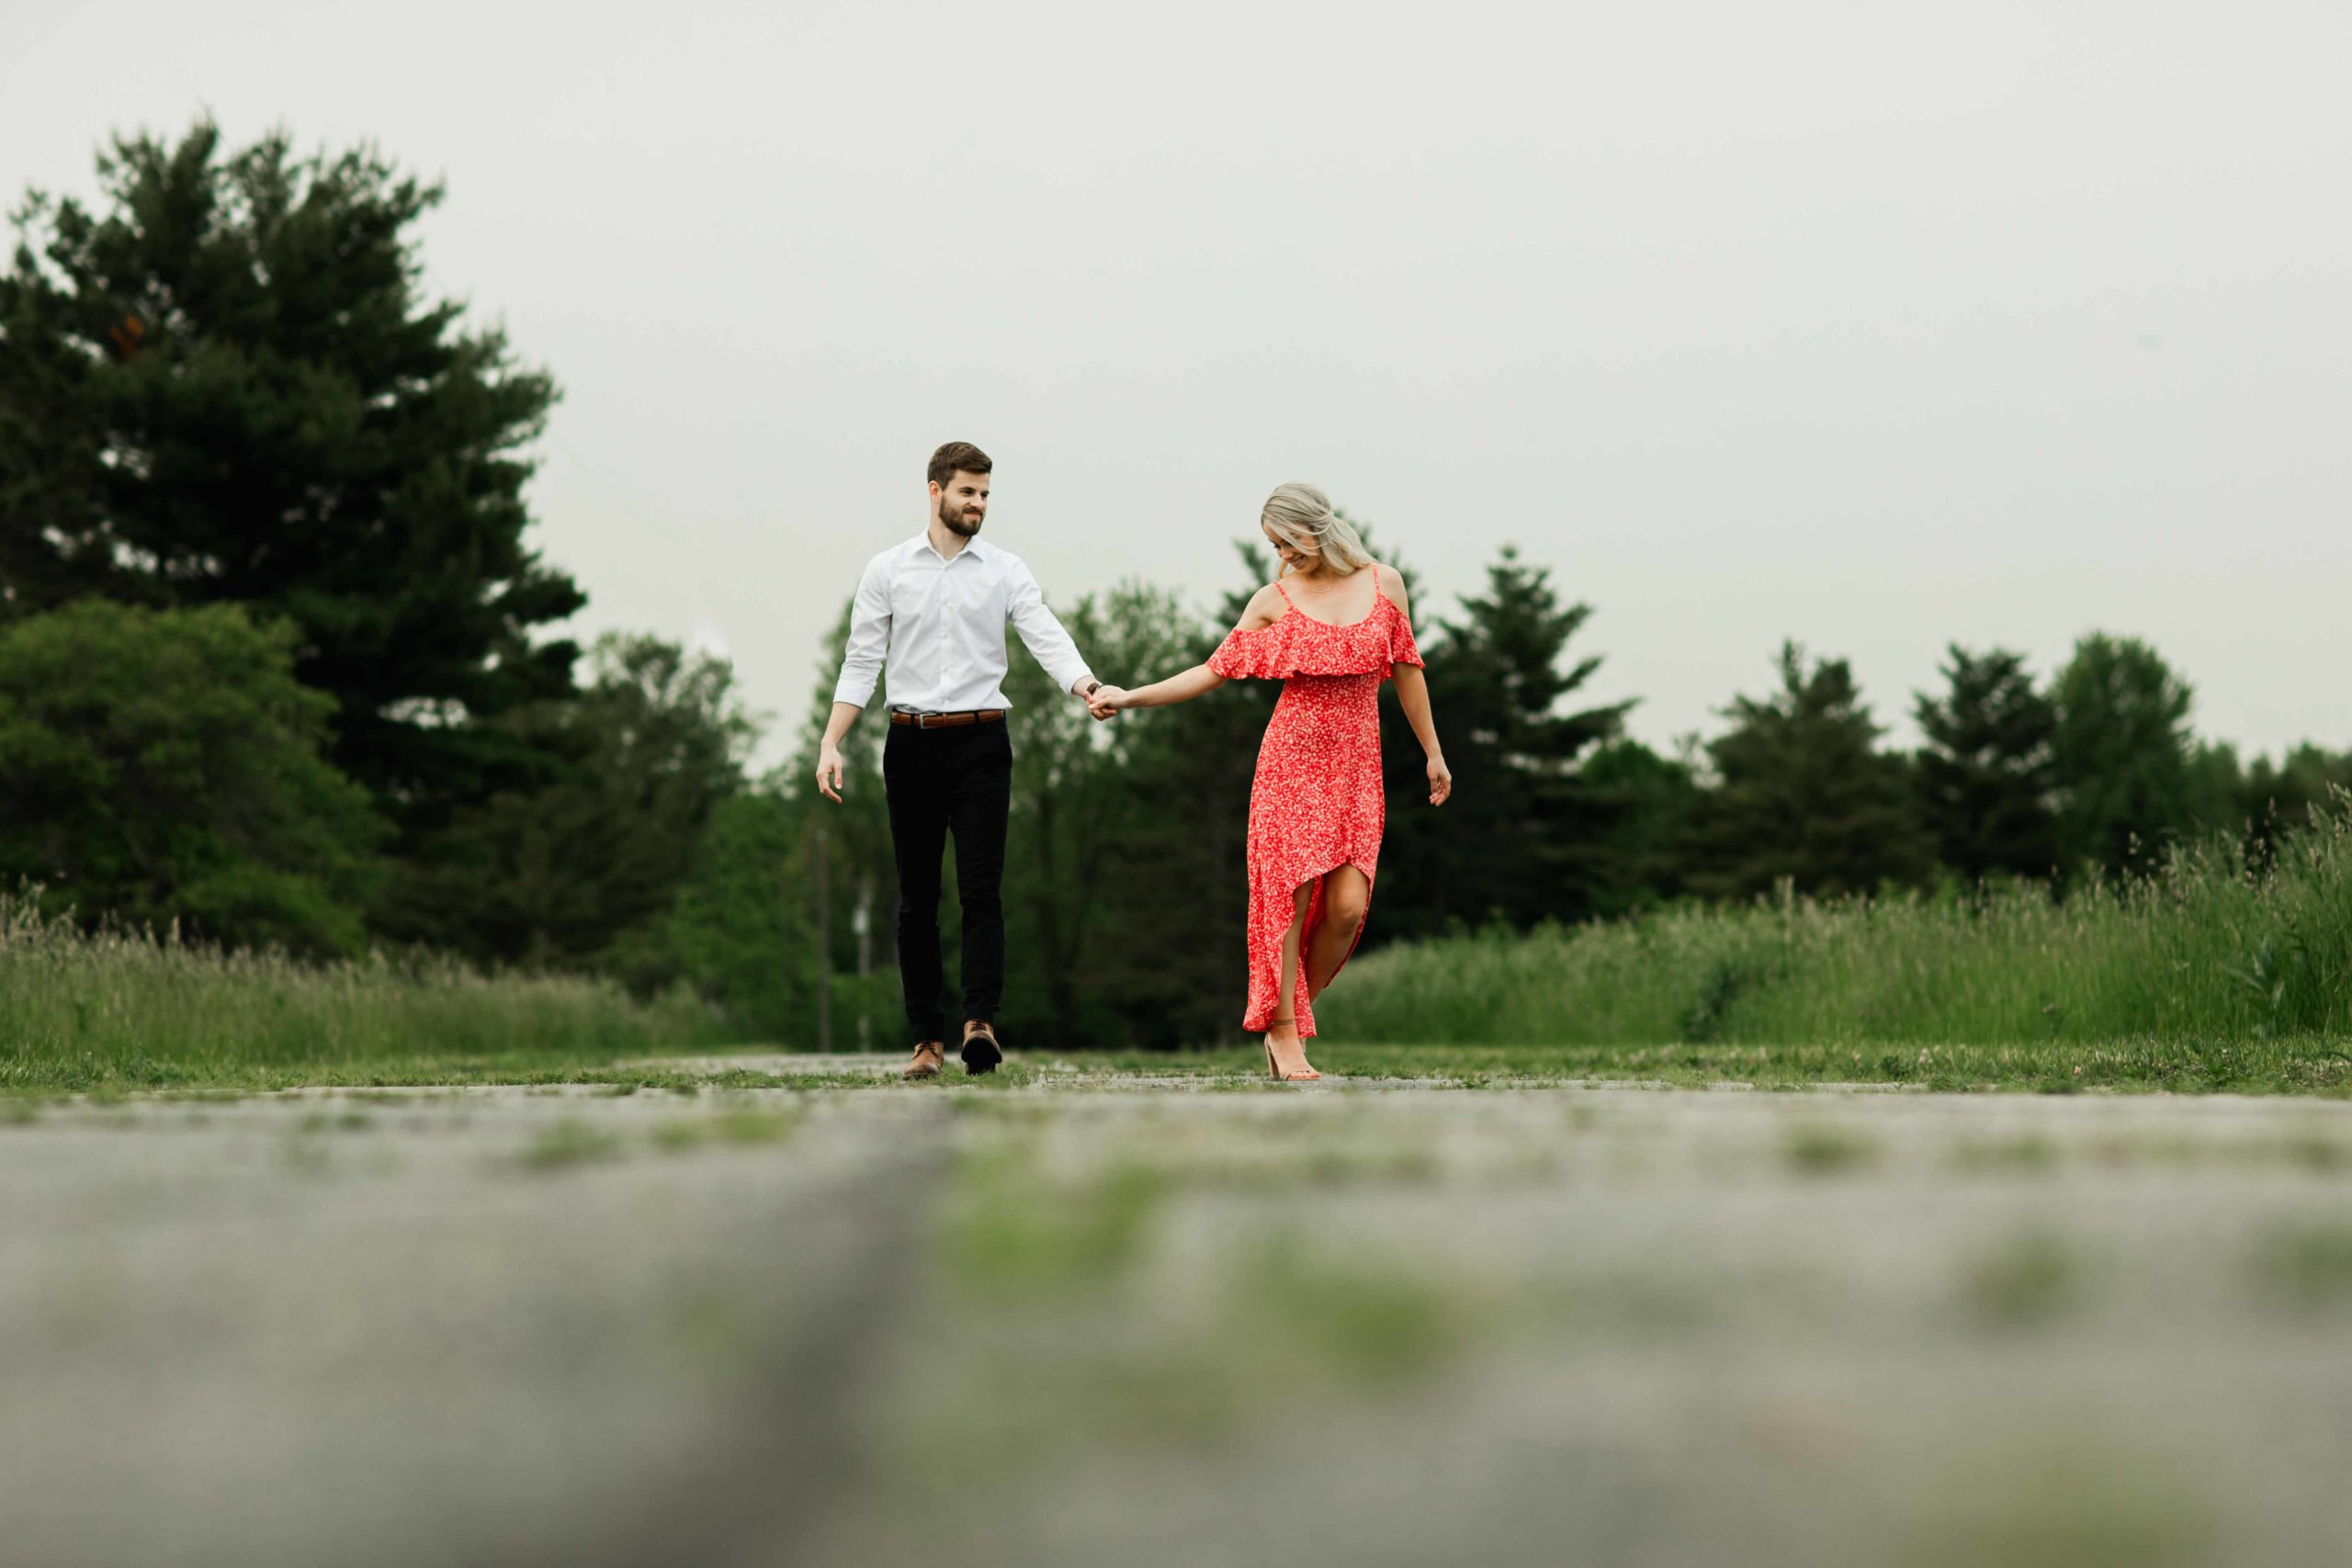 Leroy Oakes candid Engagement Photography by Saint Charles Illinois Photographer